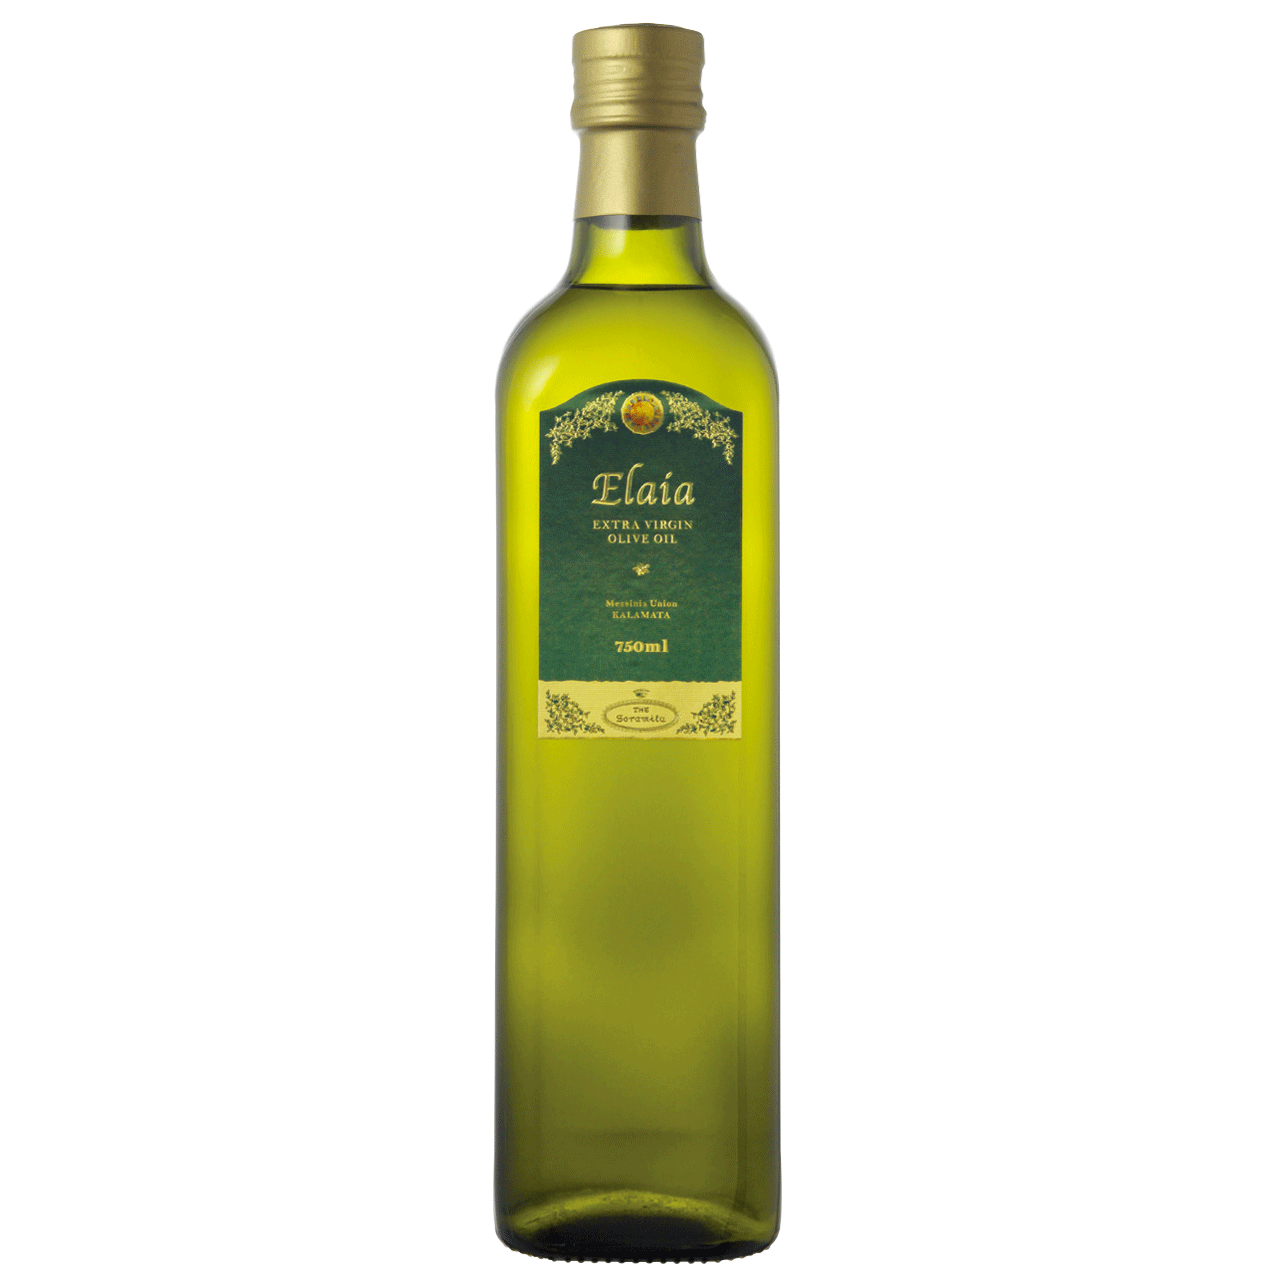 Extra Virgin Olive Oil Elia Green 750ml - Herby flavor and a refreshing aftertaste